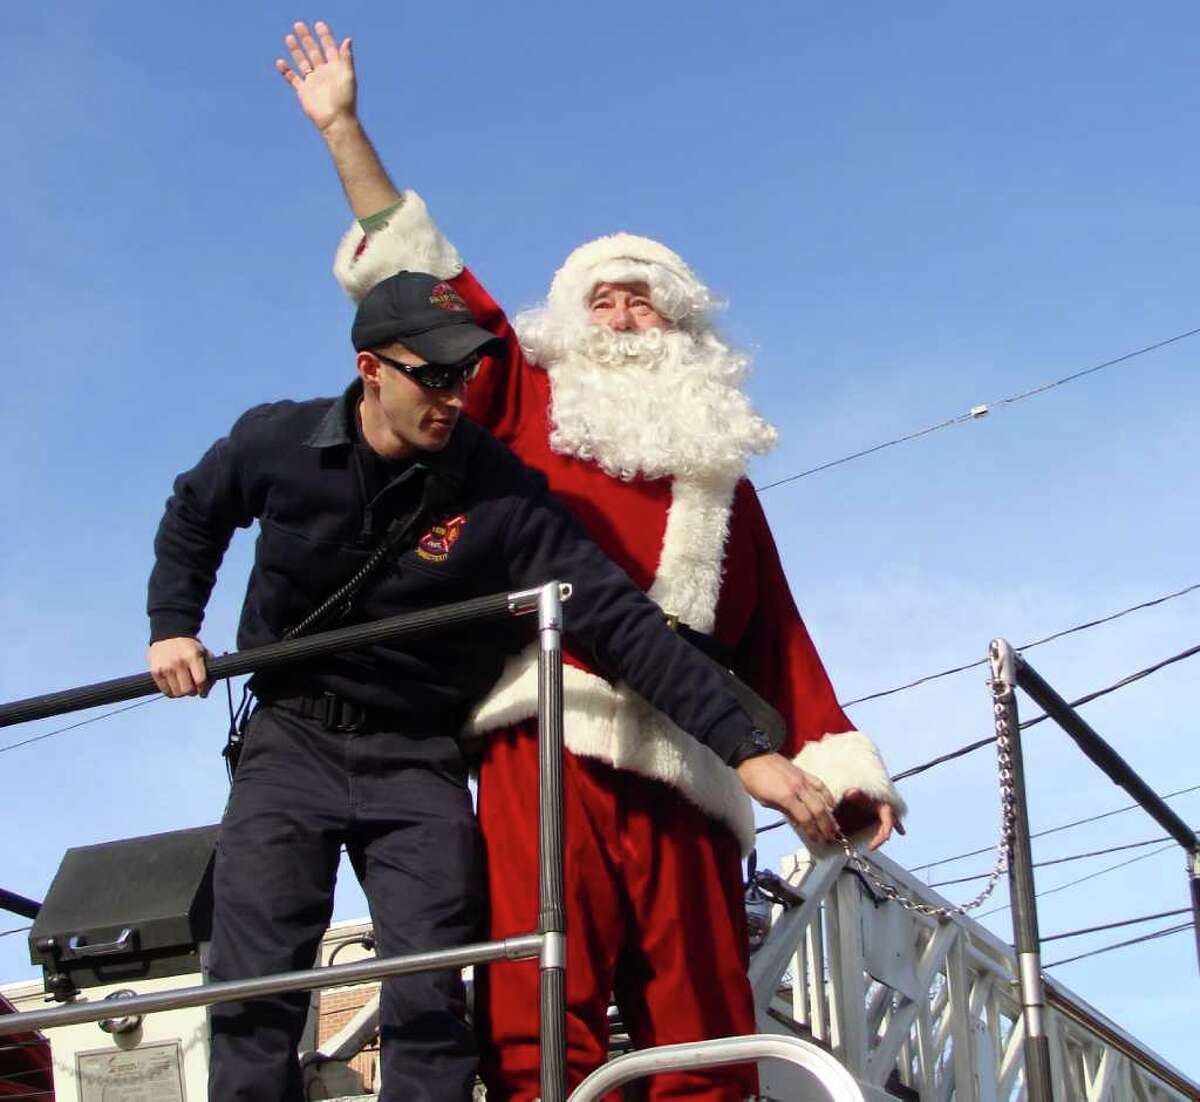 Fans throng arrival of Santa Claus in Fairfield